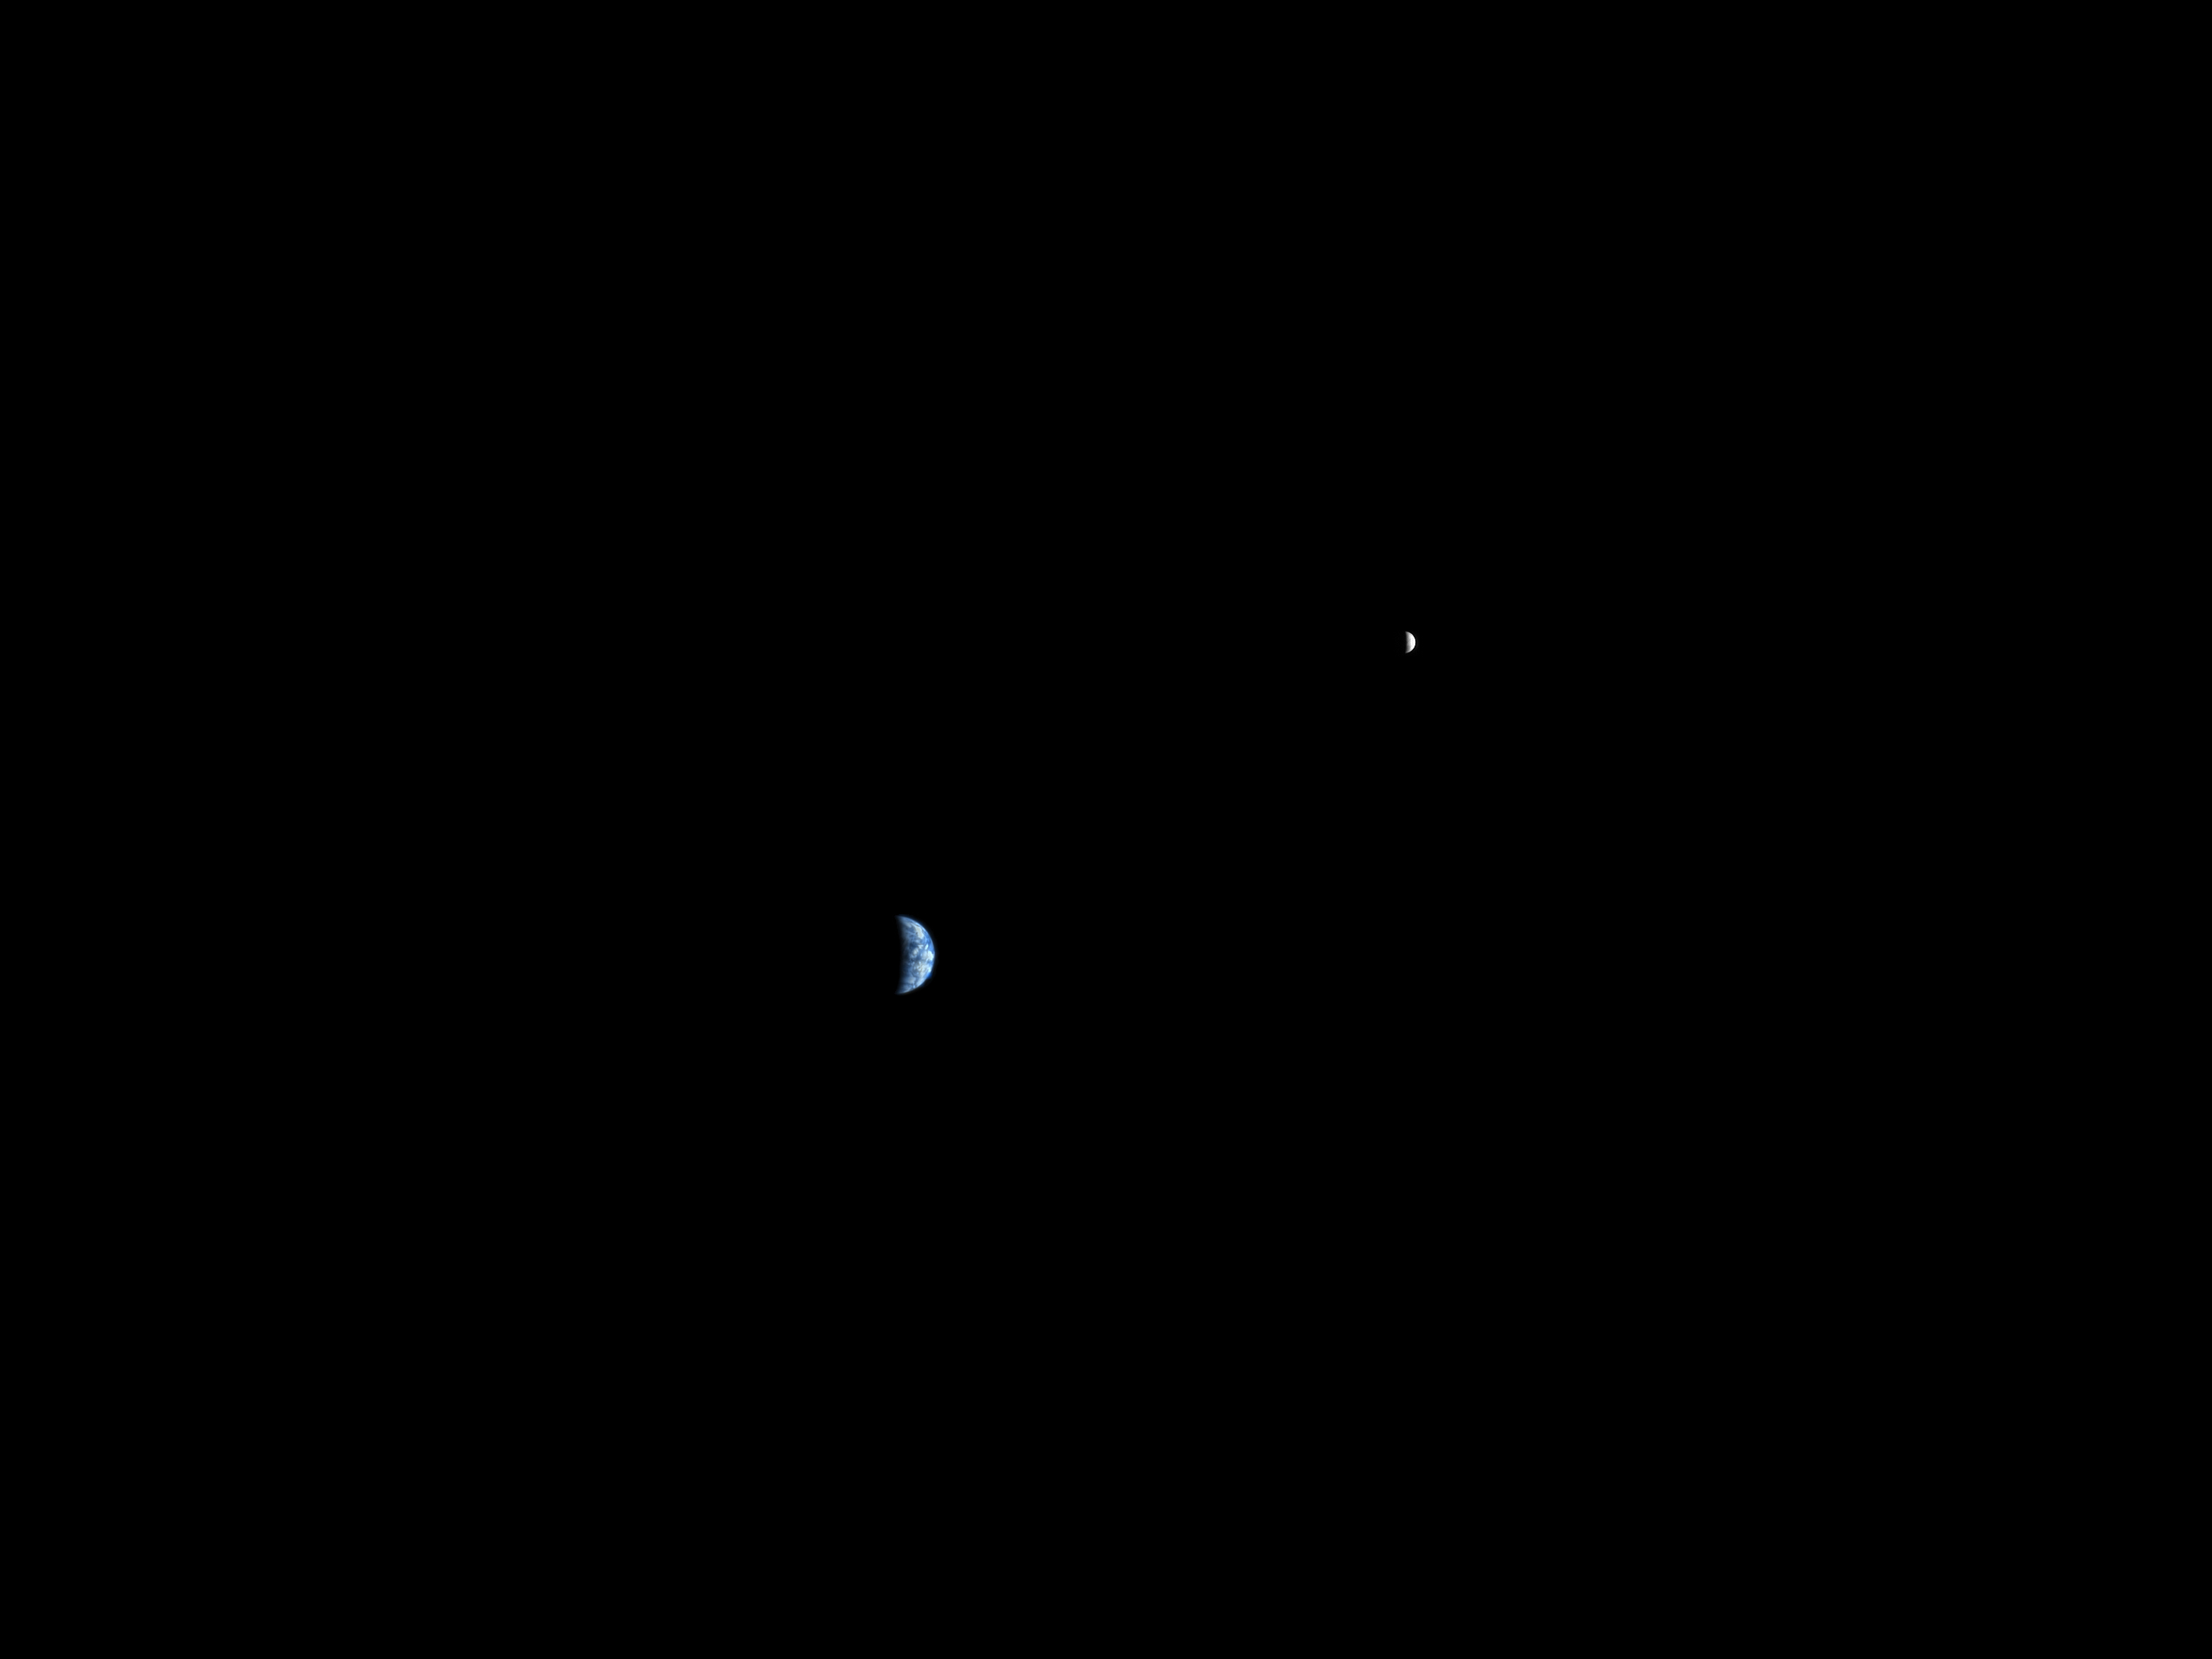 The Earth and Moon as Seen from Mars